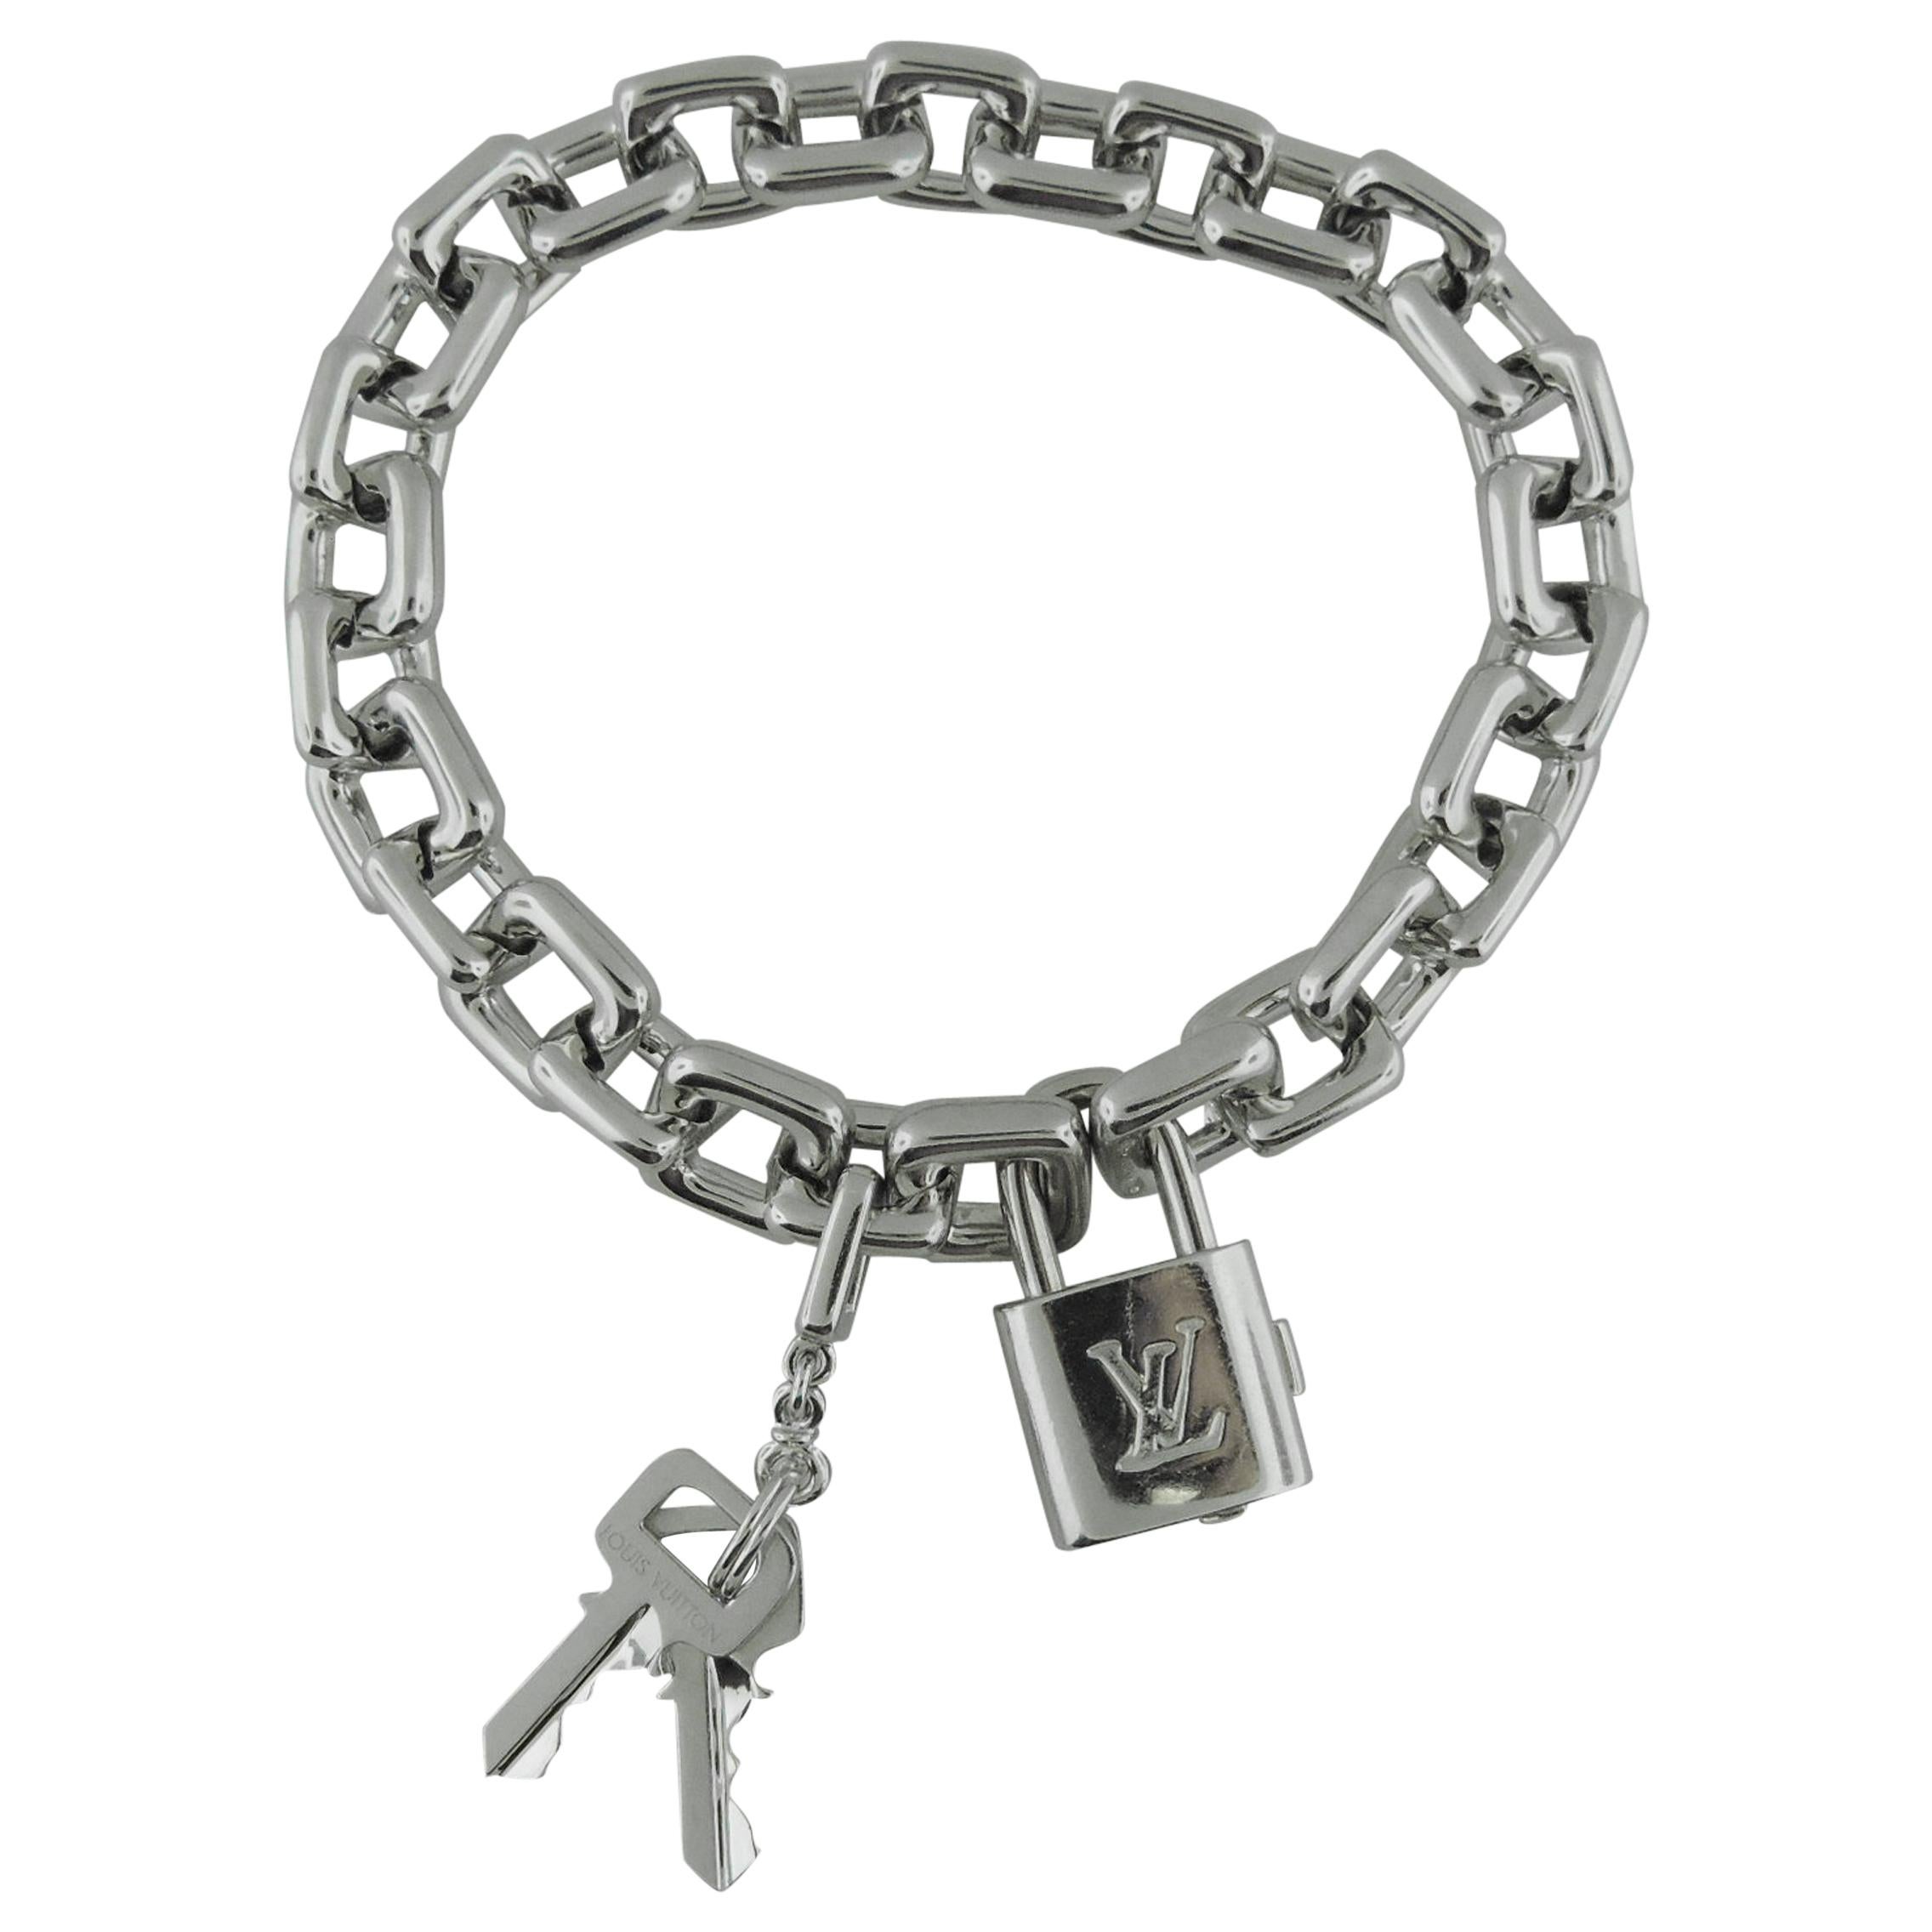 AUTH LOUIS VUITTON LOCK AND KEY 308 HOUSE OF HARLOW CHAIN BRACELET GIFT SET